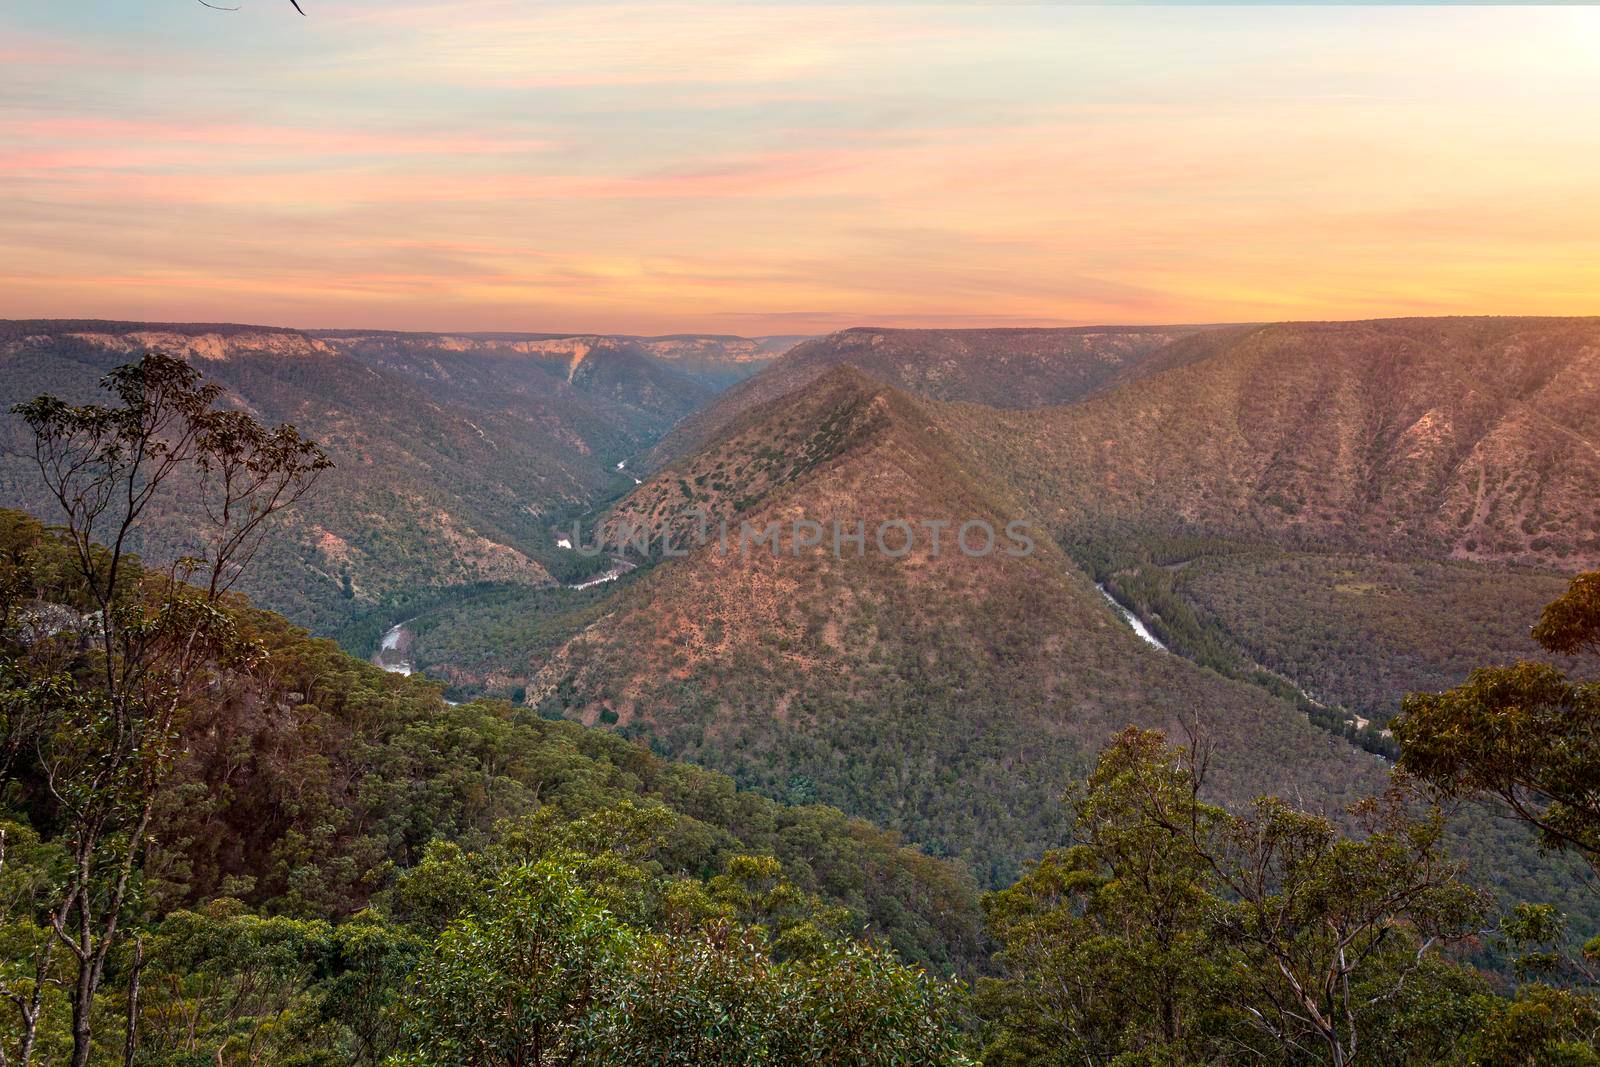 Views over Shoalhaven river and gorge from a mountain lookout by lovleah